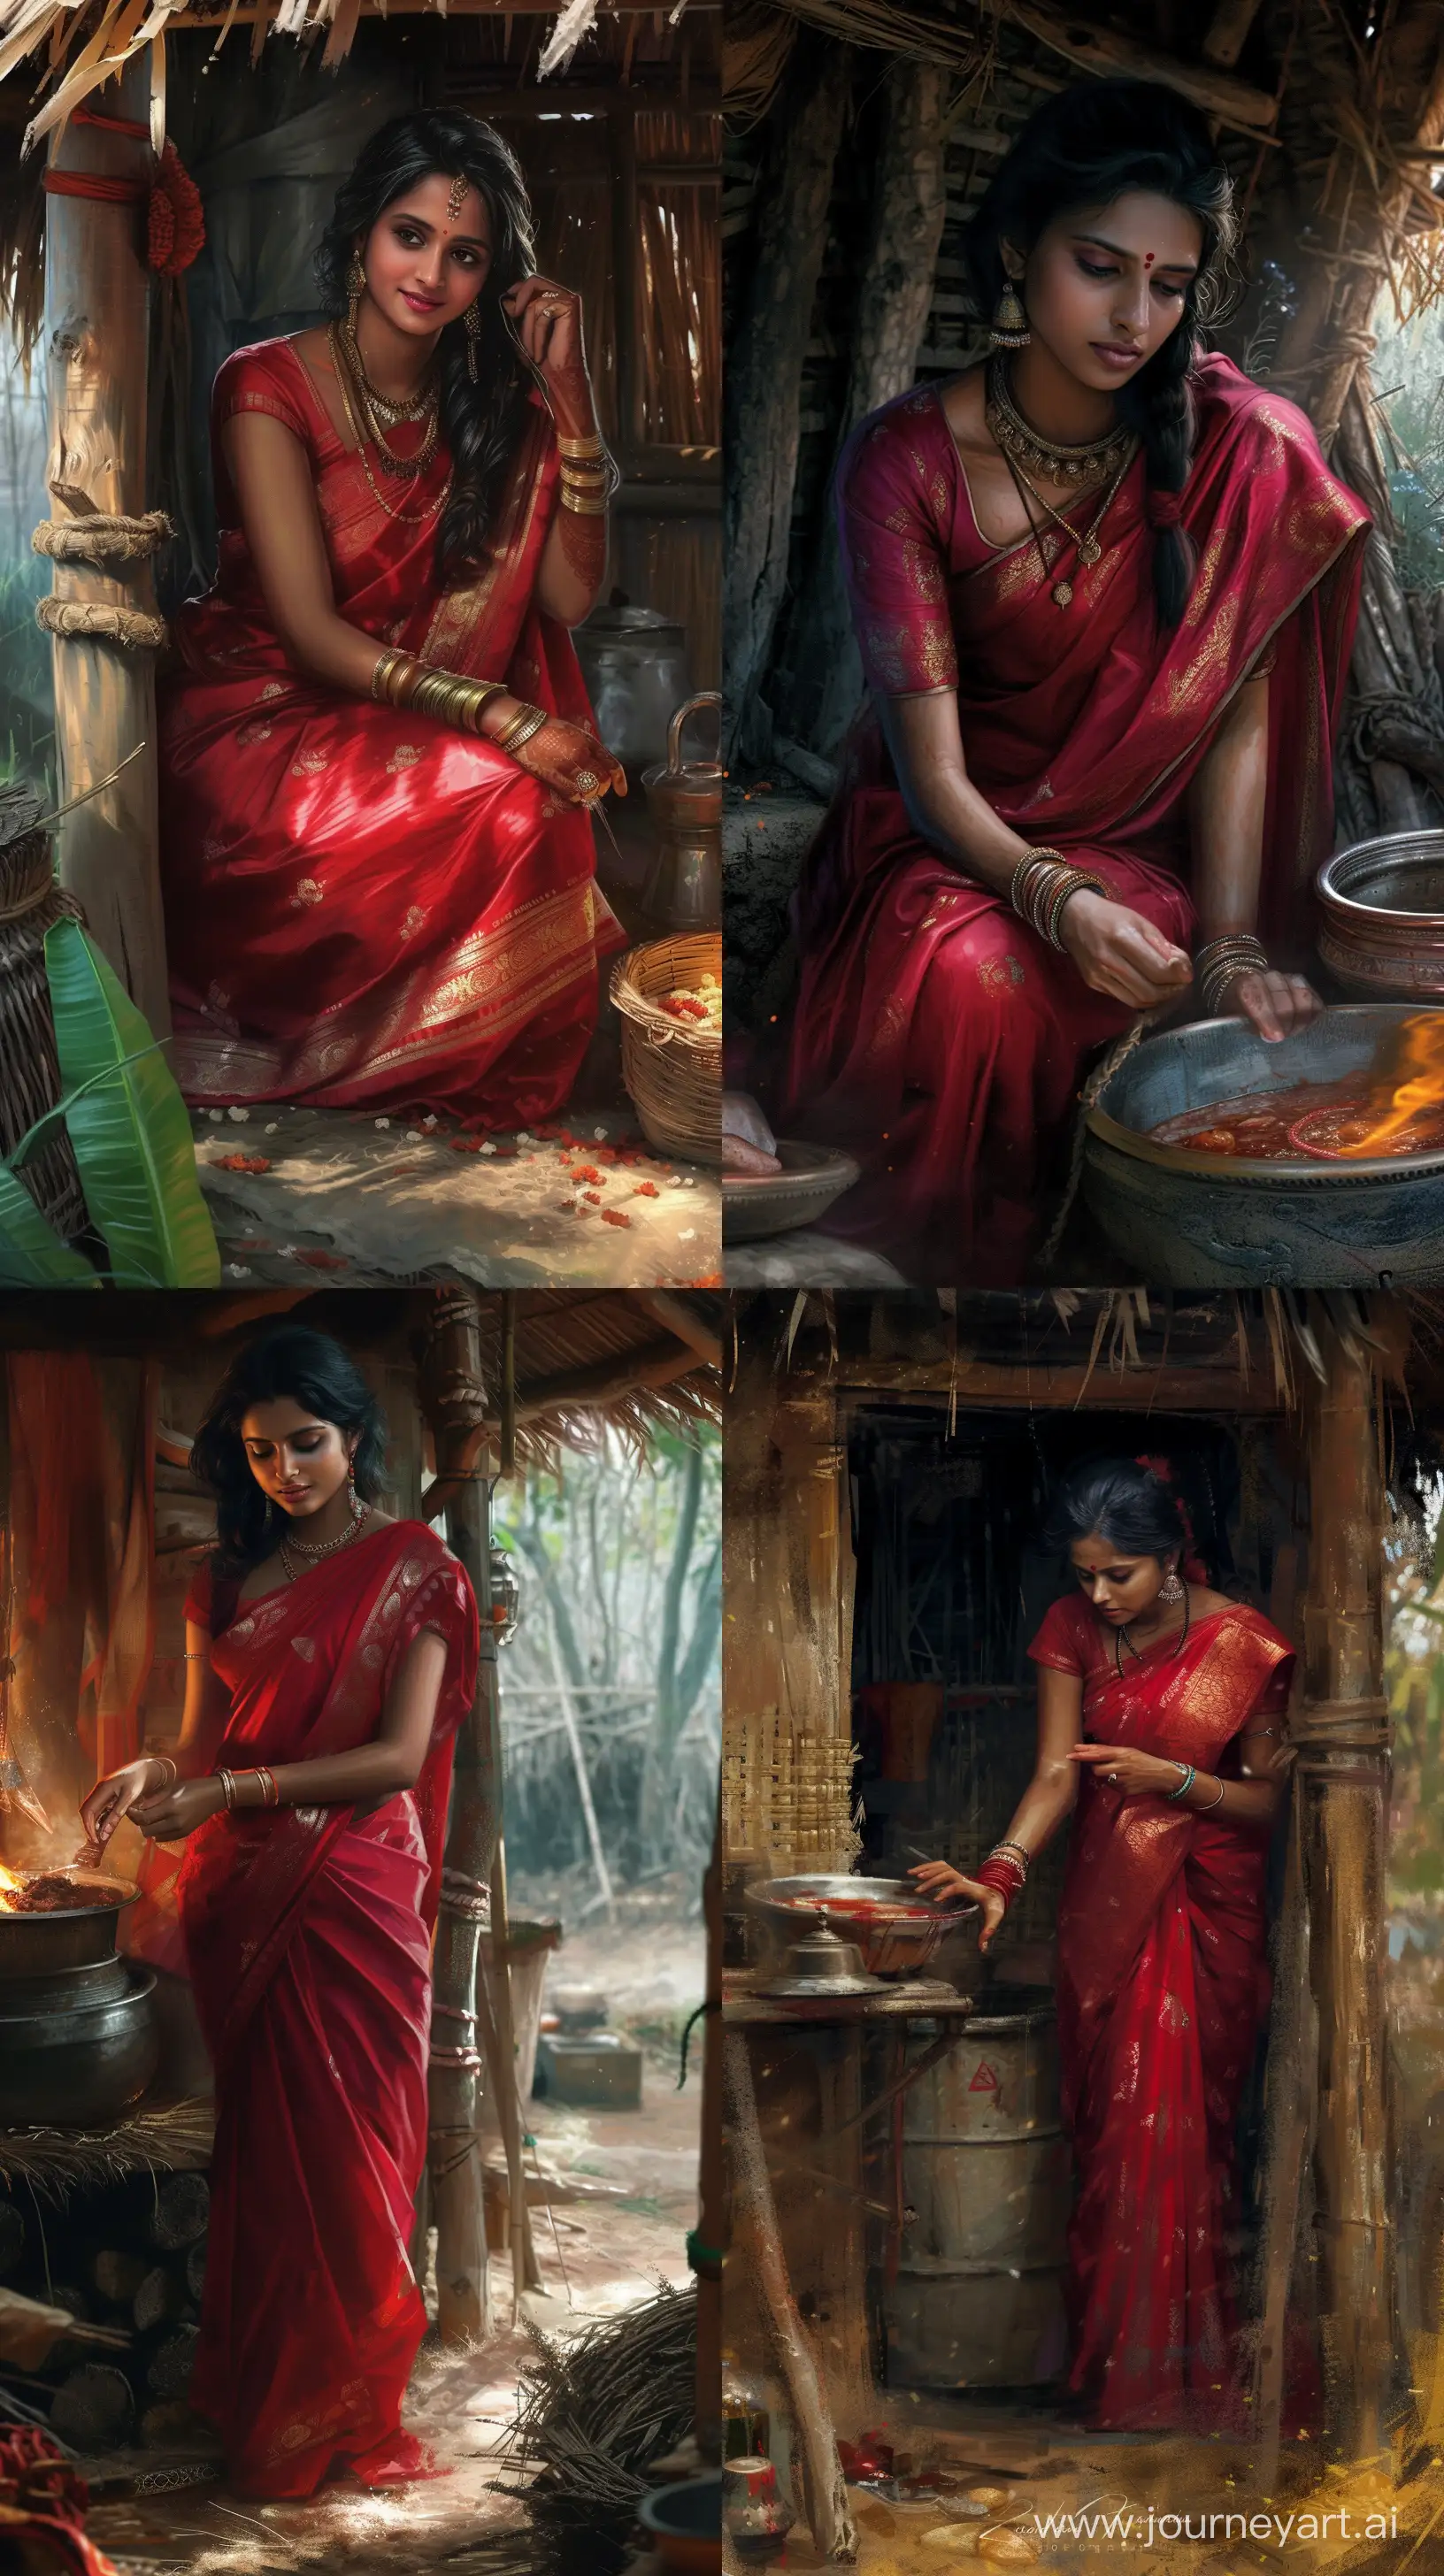 Traditional-Indian-Woman-in-Red-Saree-Performing-Household-Chores